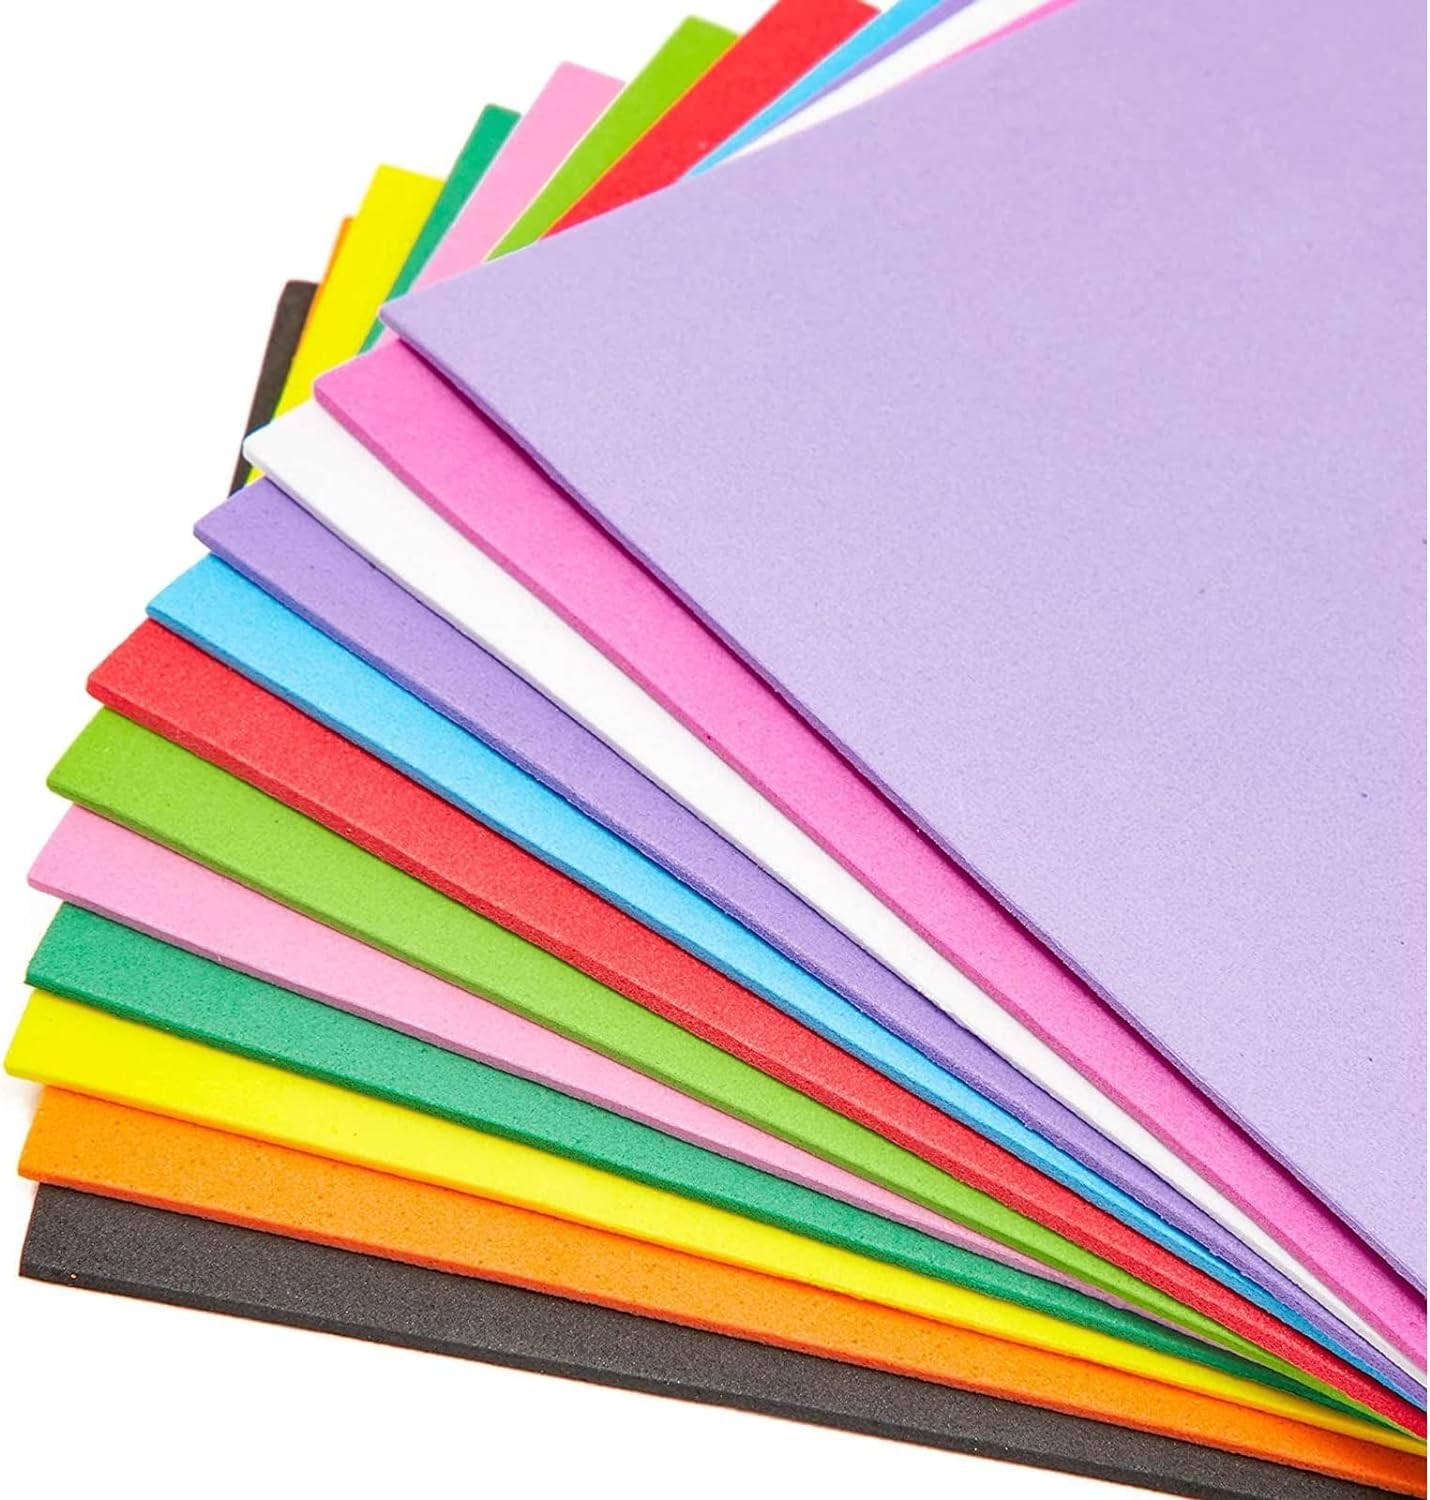 96 Pack Multicolored 2mm Eva Foam Sheets For Cosplay Costumes Arts And Crafts Projects 4x6 inch By PAIDU